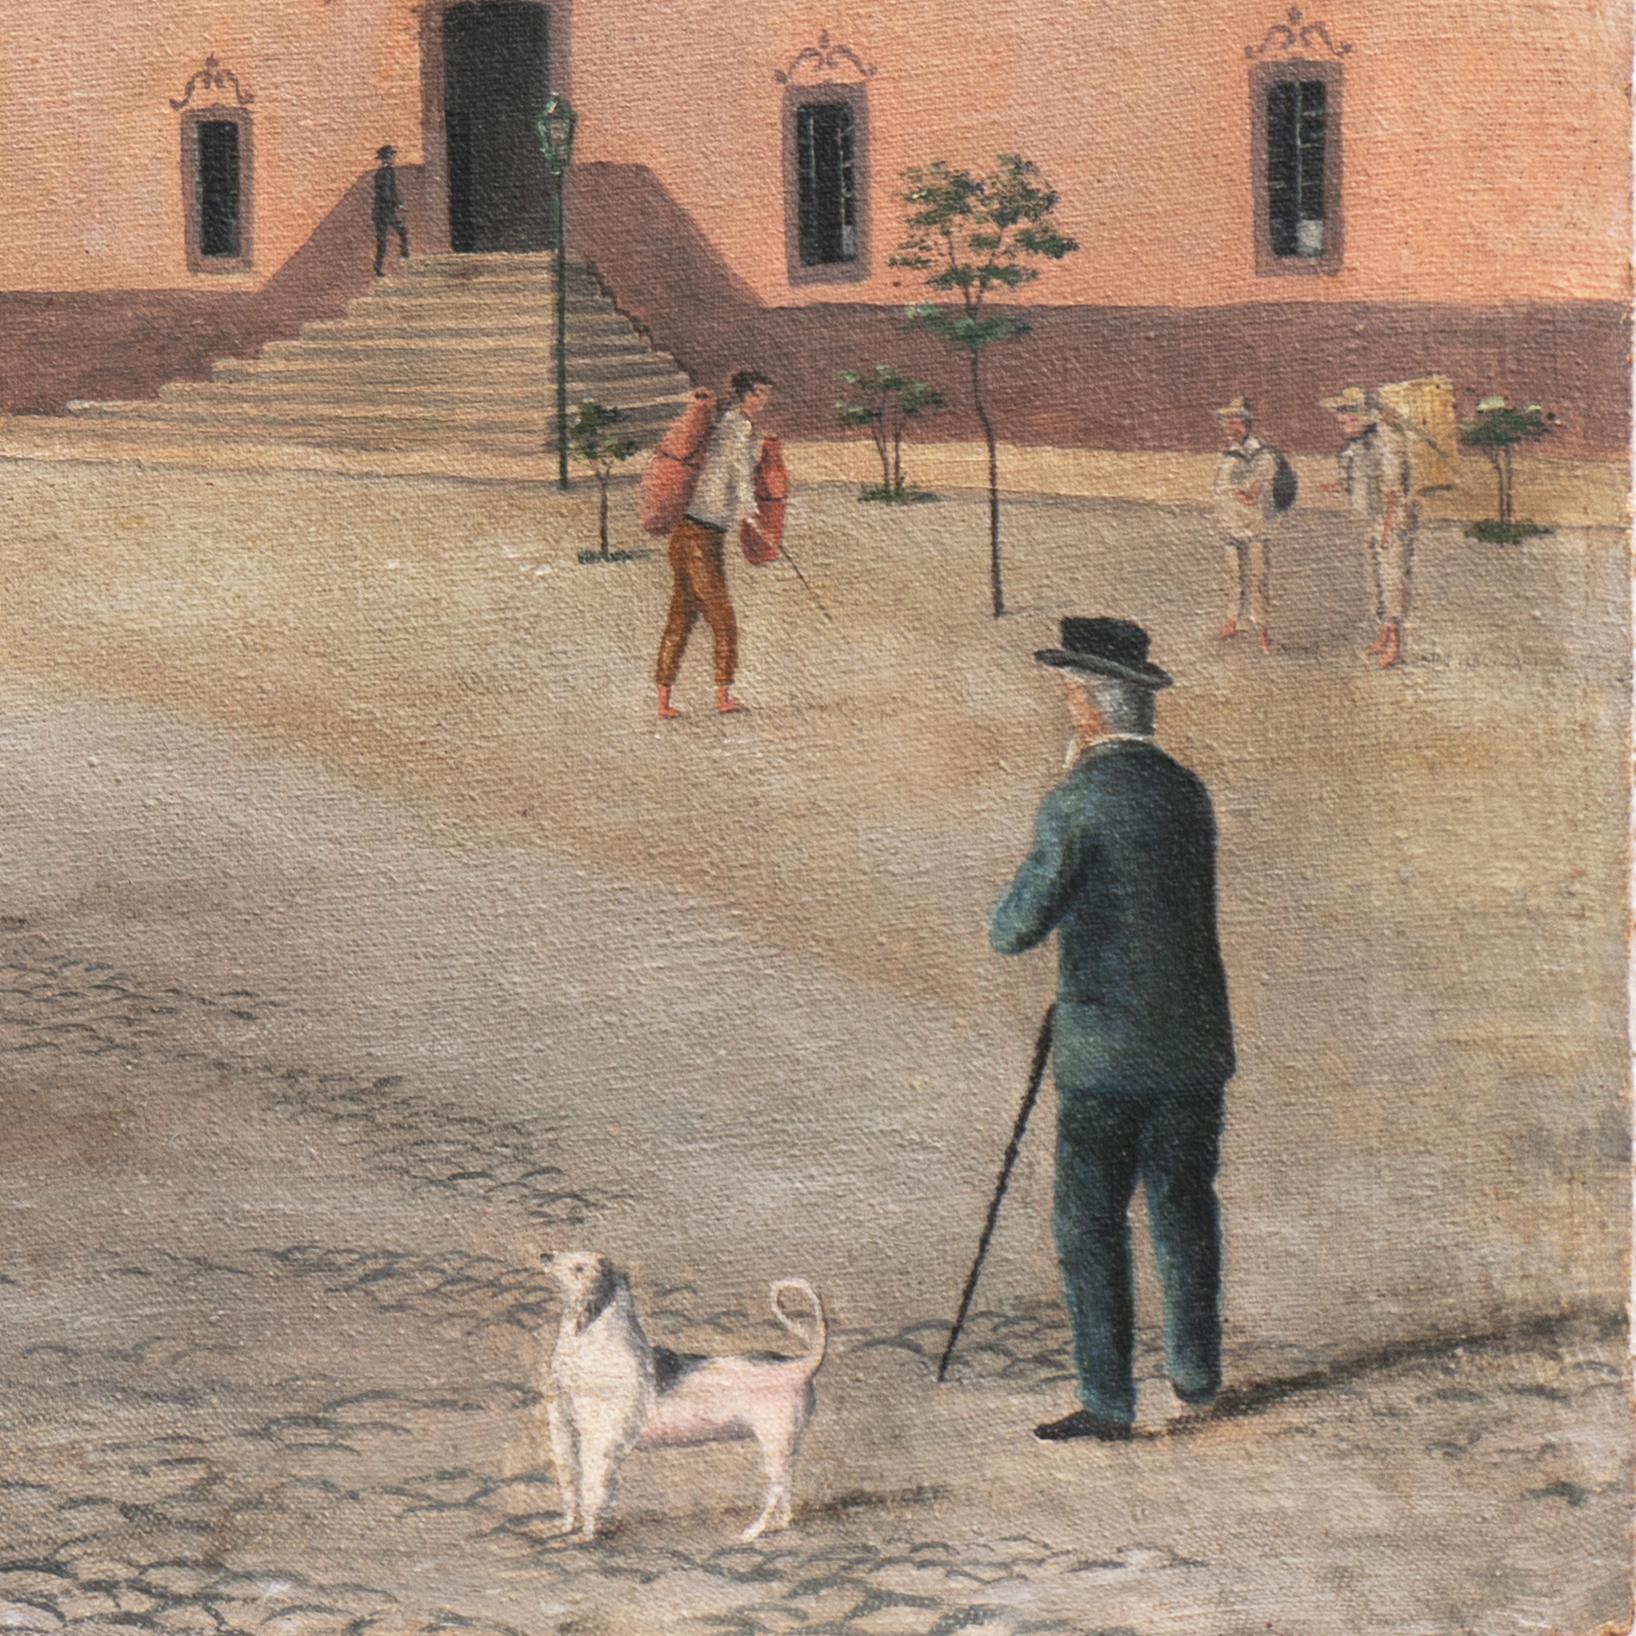 'Mexican Plaza', Palacio Municipal, Cobbled Square, Paseo, 19th Century Oil - Brown Landscape Painting by M. L. Roldán